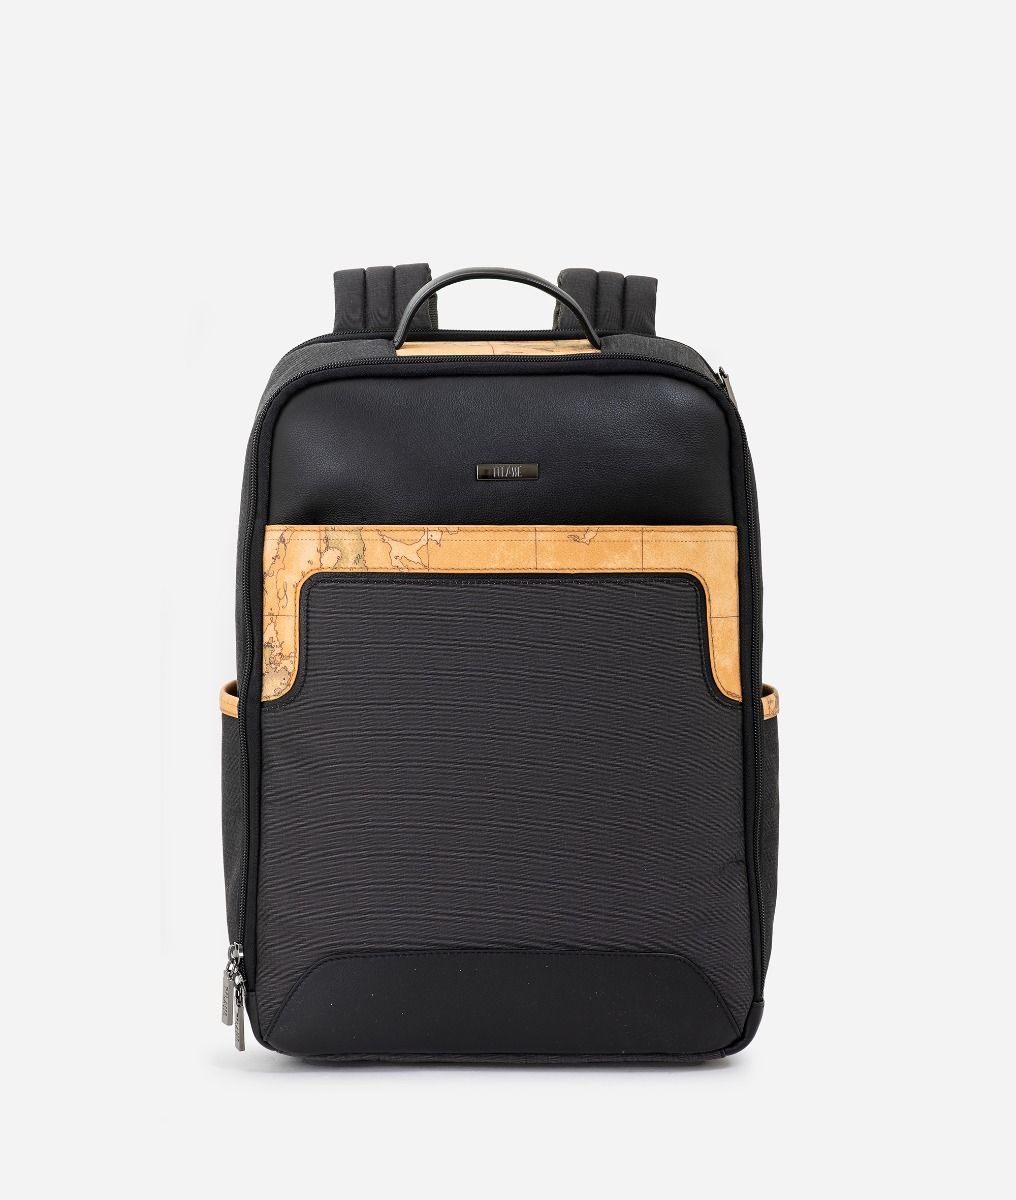 Geo Classic laptop 15 inches backpack black,front